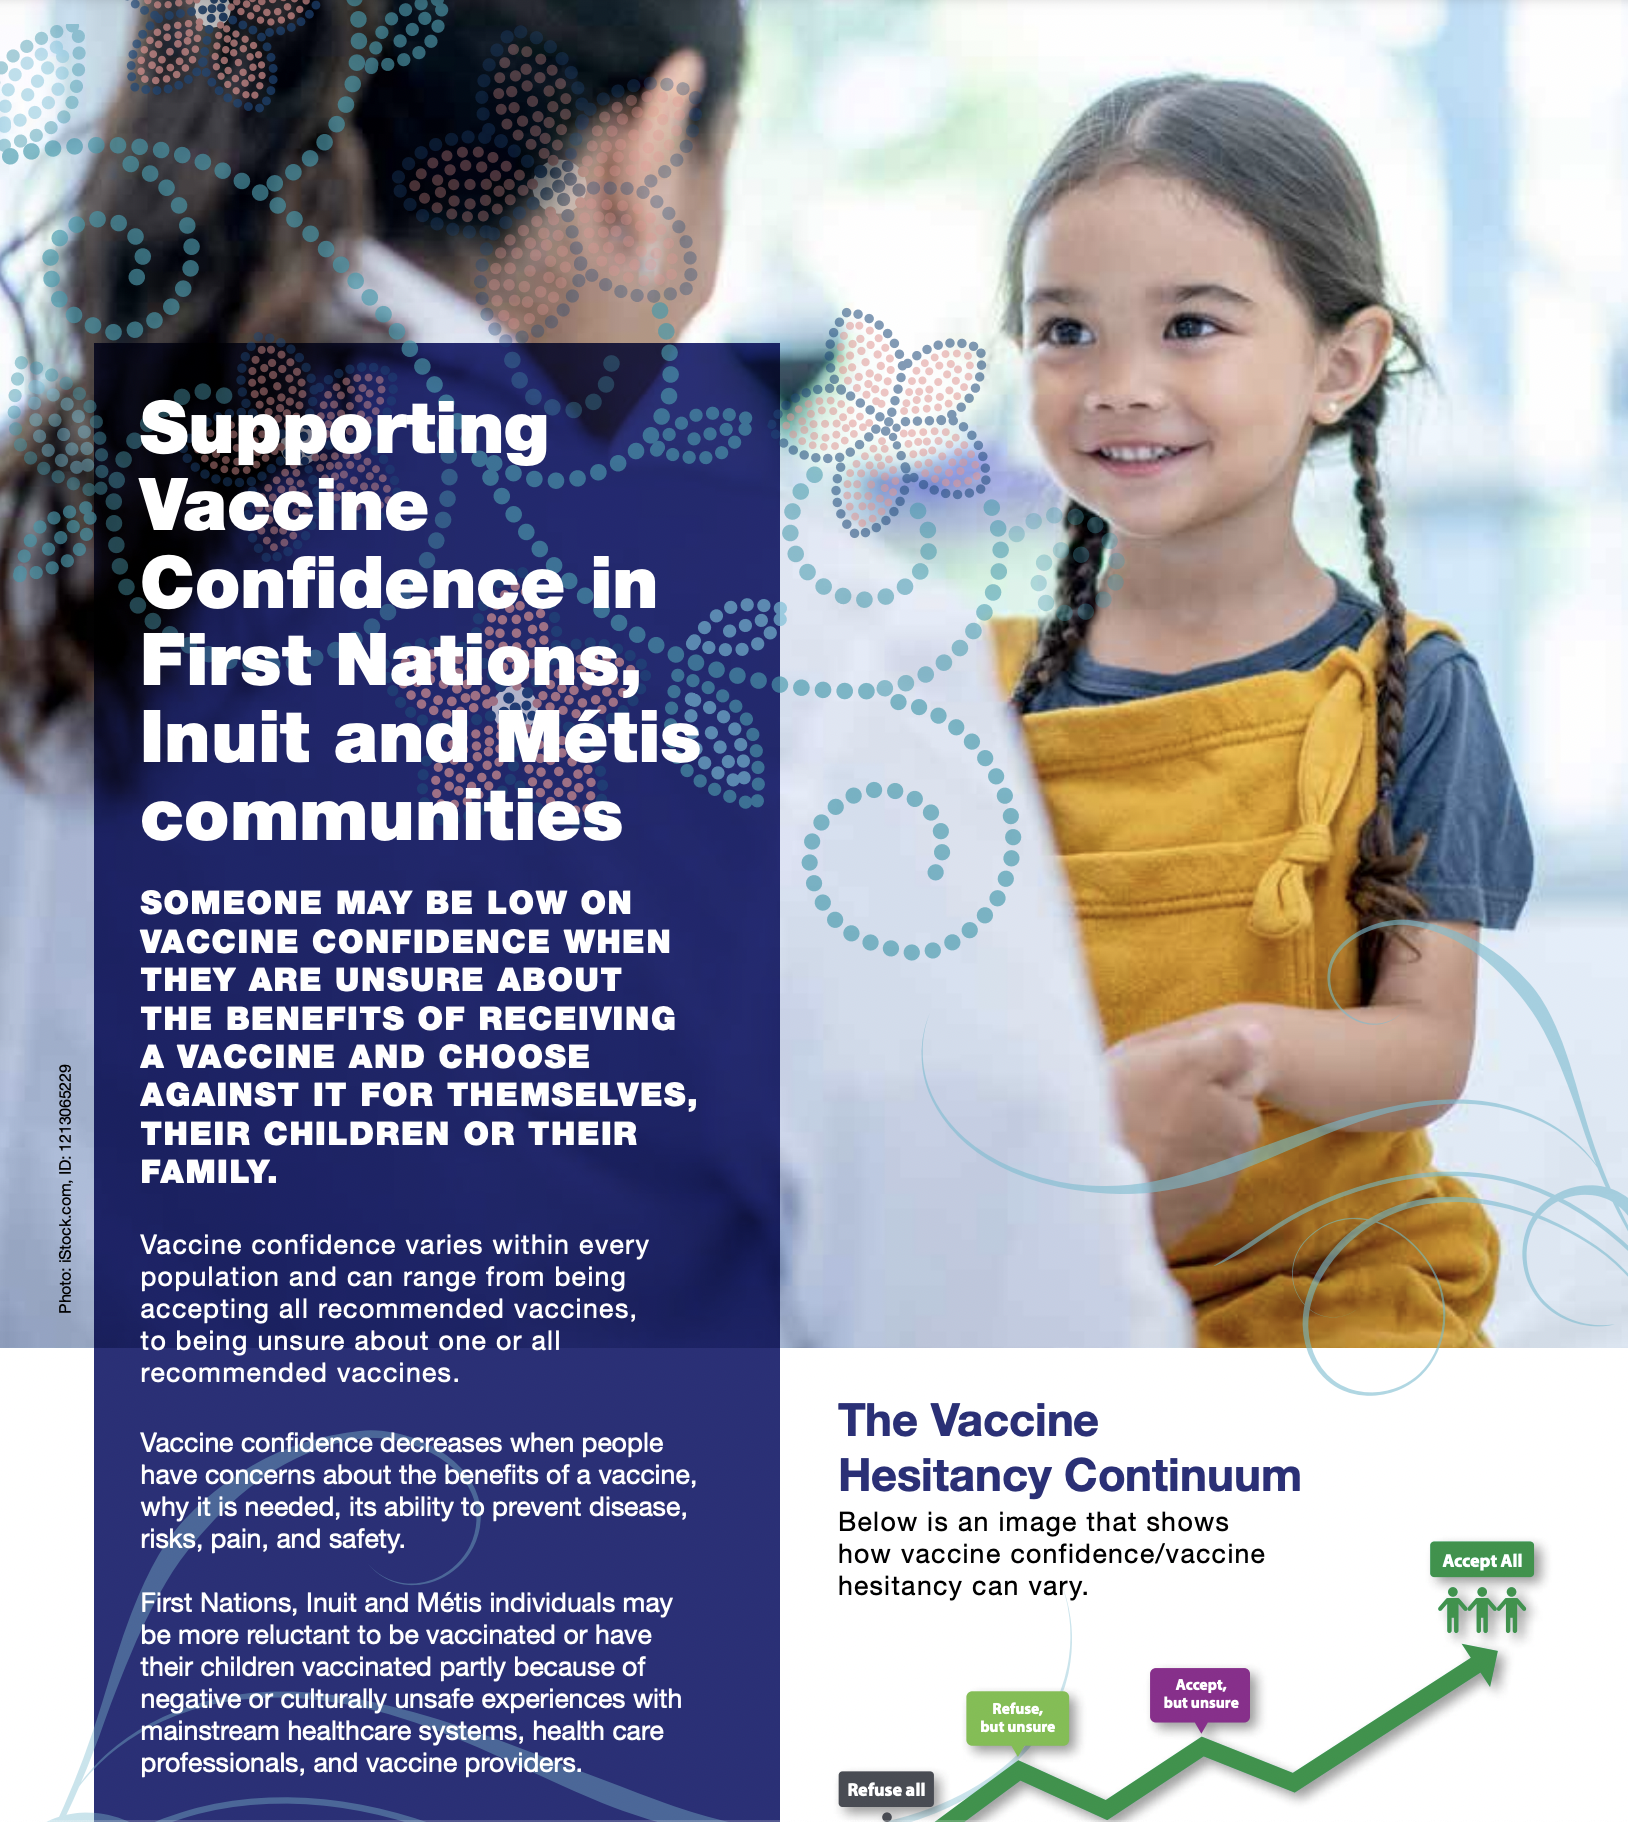 Supporting Vaccine Confidence in First Nations, Inuit and Métis communities